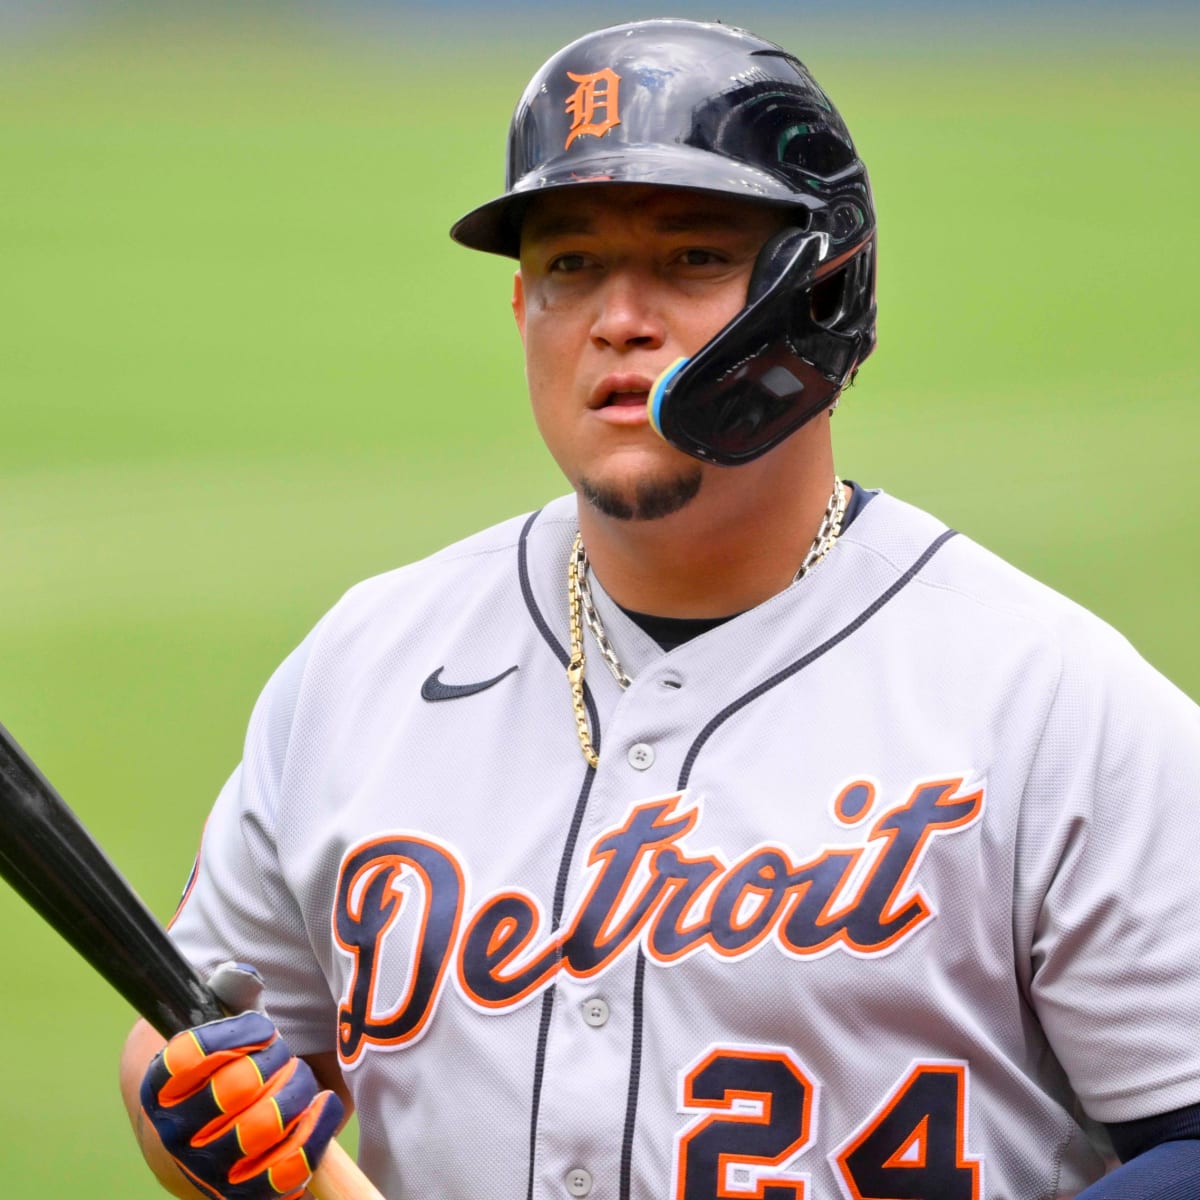 Miguel Cabrera retires: Legendary hitter signs off after 21 years in MLB